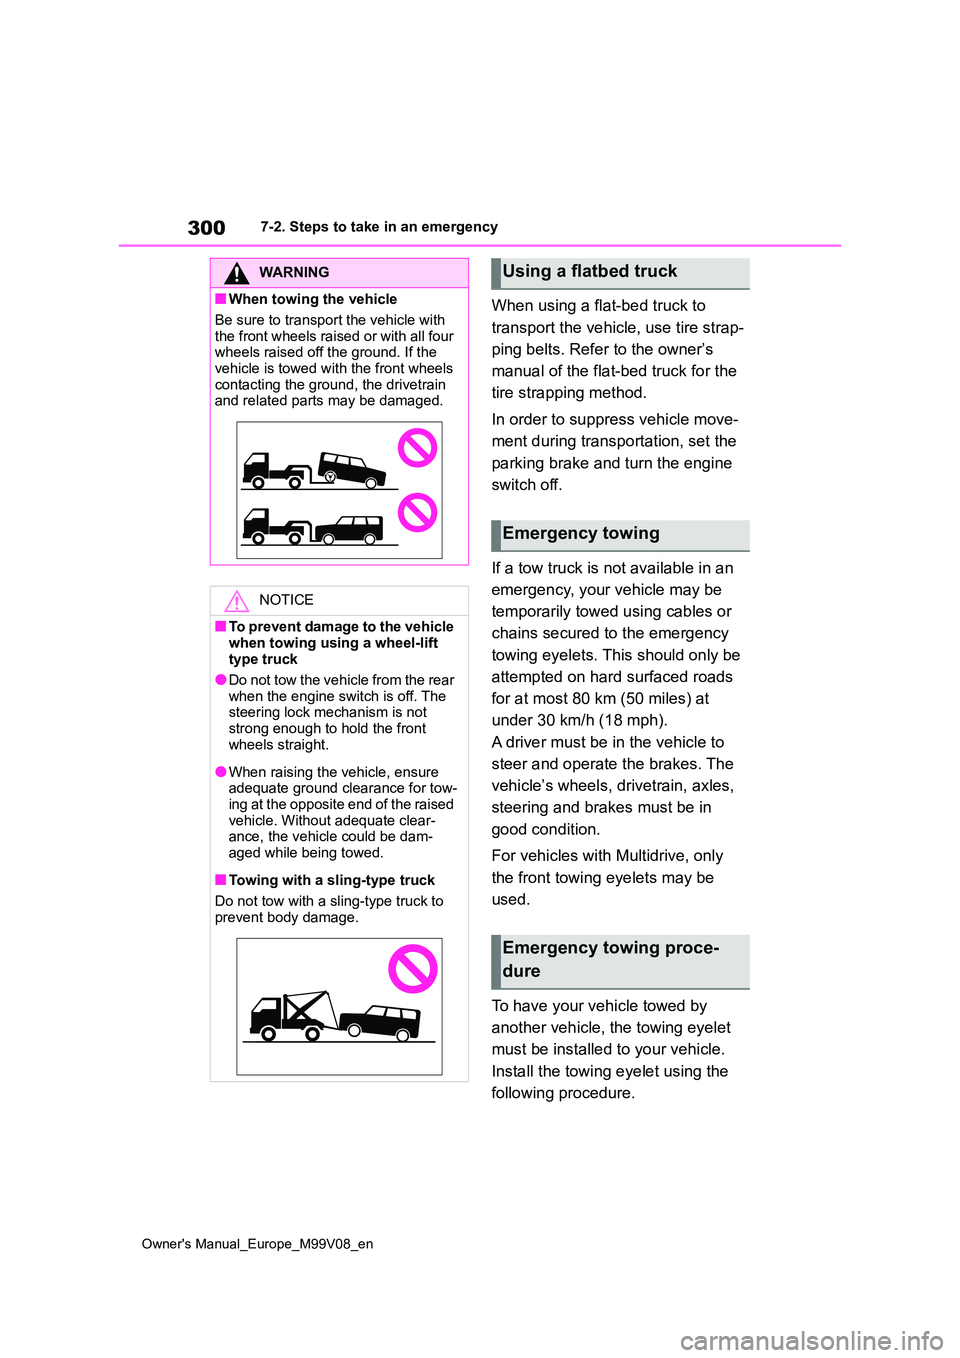 TOYOTA AYGO X 2022  Owners Manual (in English) 300
Owner's Manual_Europe_M99V08_en
7-2. Steps to take in an emergency
When using a flat-bed truck to  
transport the vehicle, use tire strap- 
ping belts. Refer to the owner’s  
manual of the f